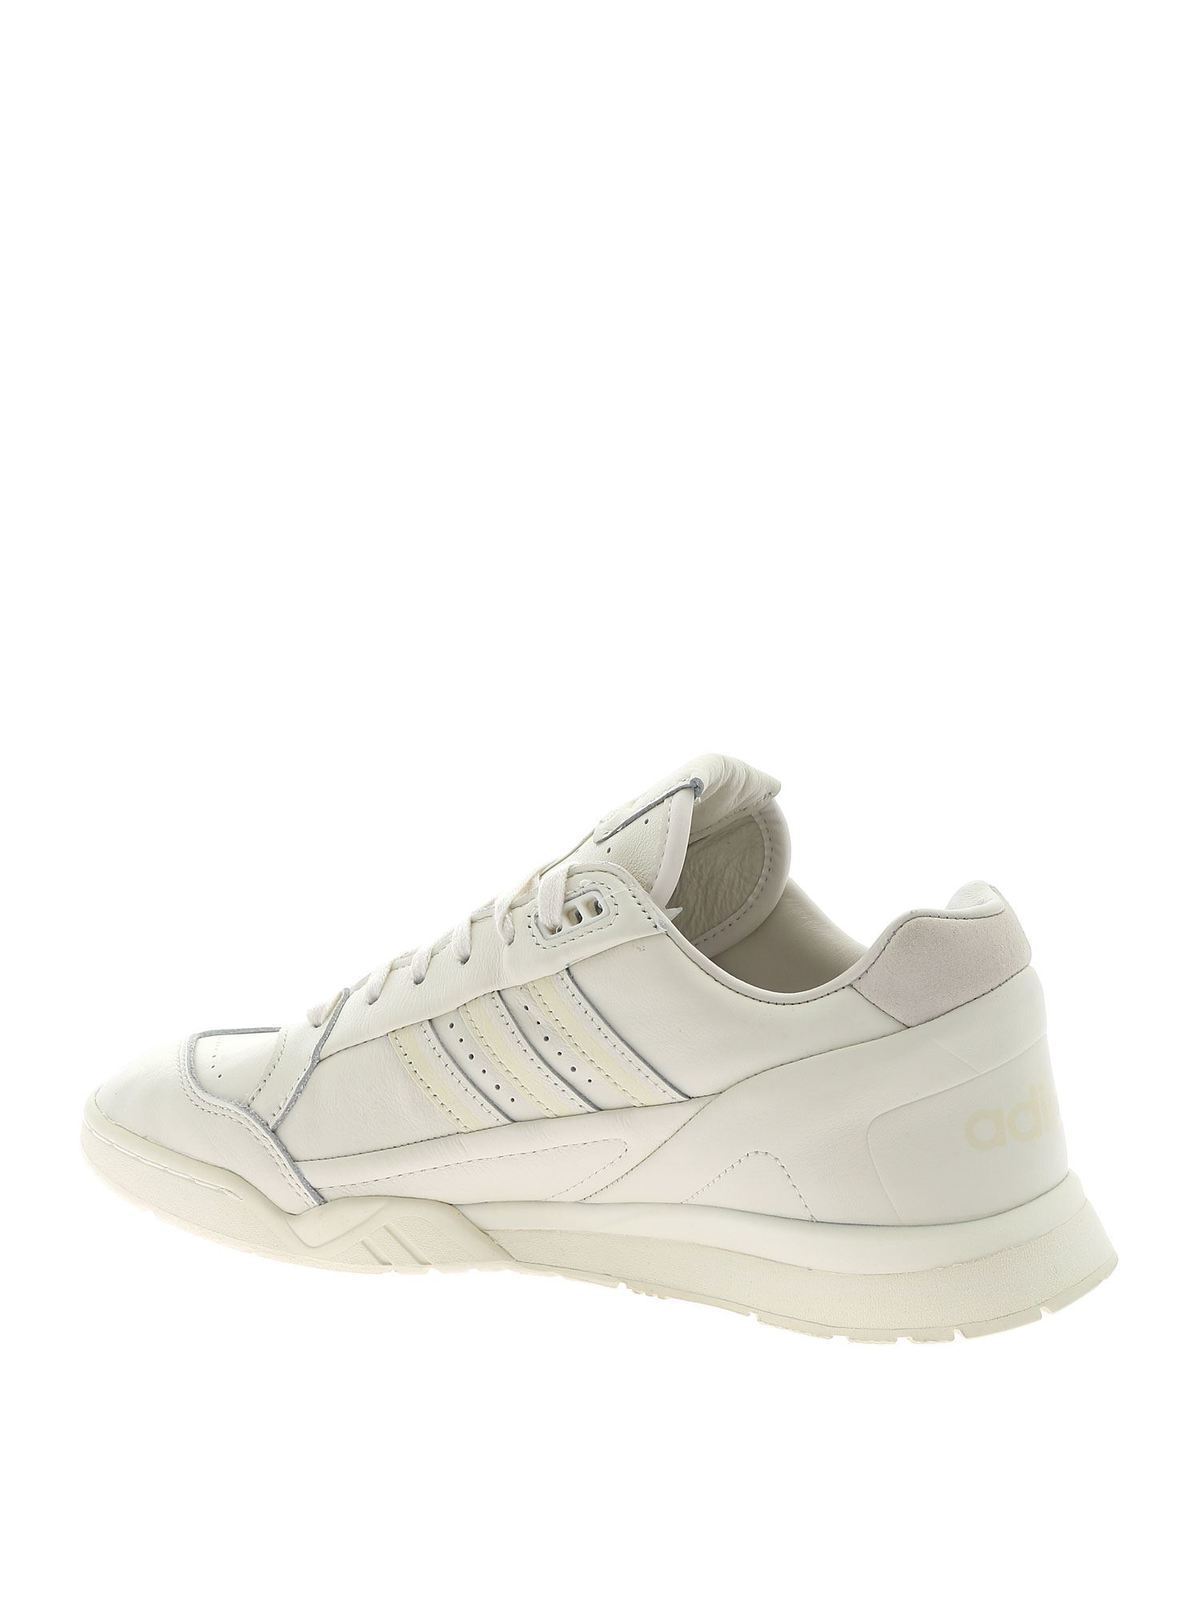 Trainers Adidas - A.R. sneakers in ivory color EG2646